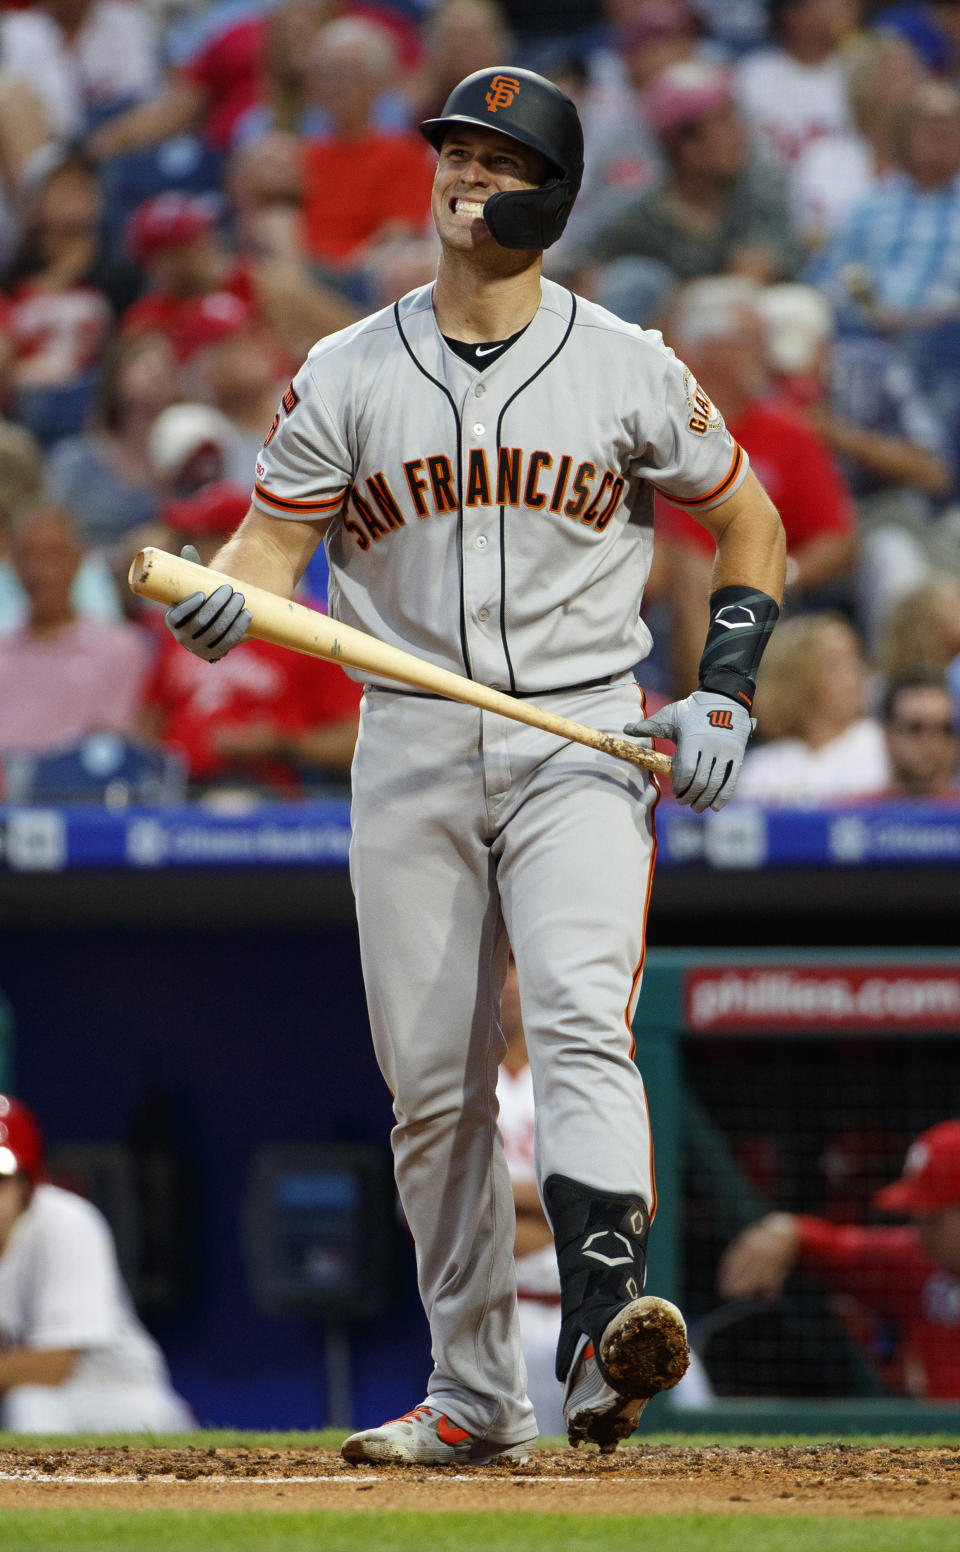 San Francisco Giants' Buster Posey reacts to fouling the ball off during the third inning of the team's baseball game against the Philadelphia Phillies, Wednesday, July 31, 2019, in Philadelphia. (AP Photo/Chris Szagola)